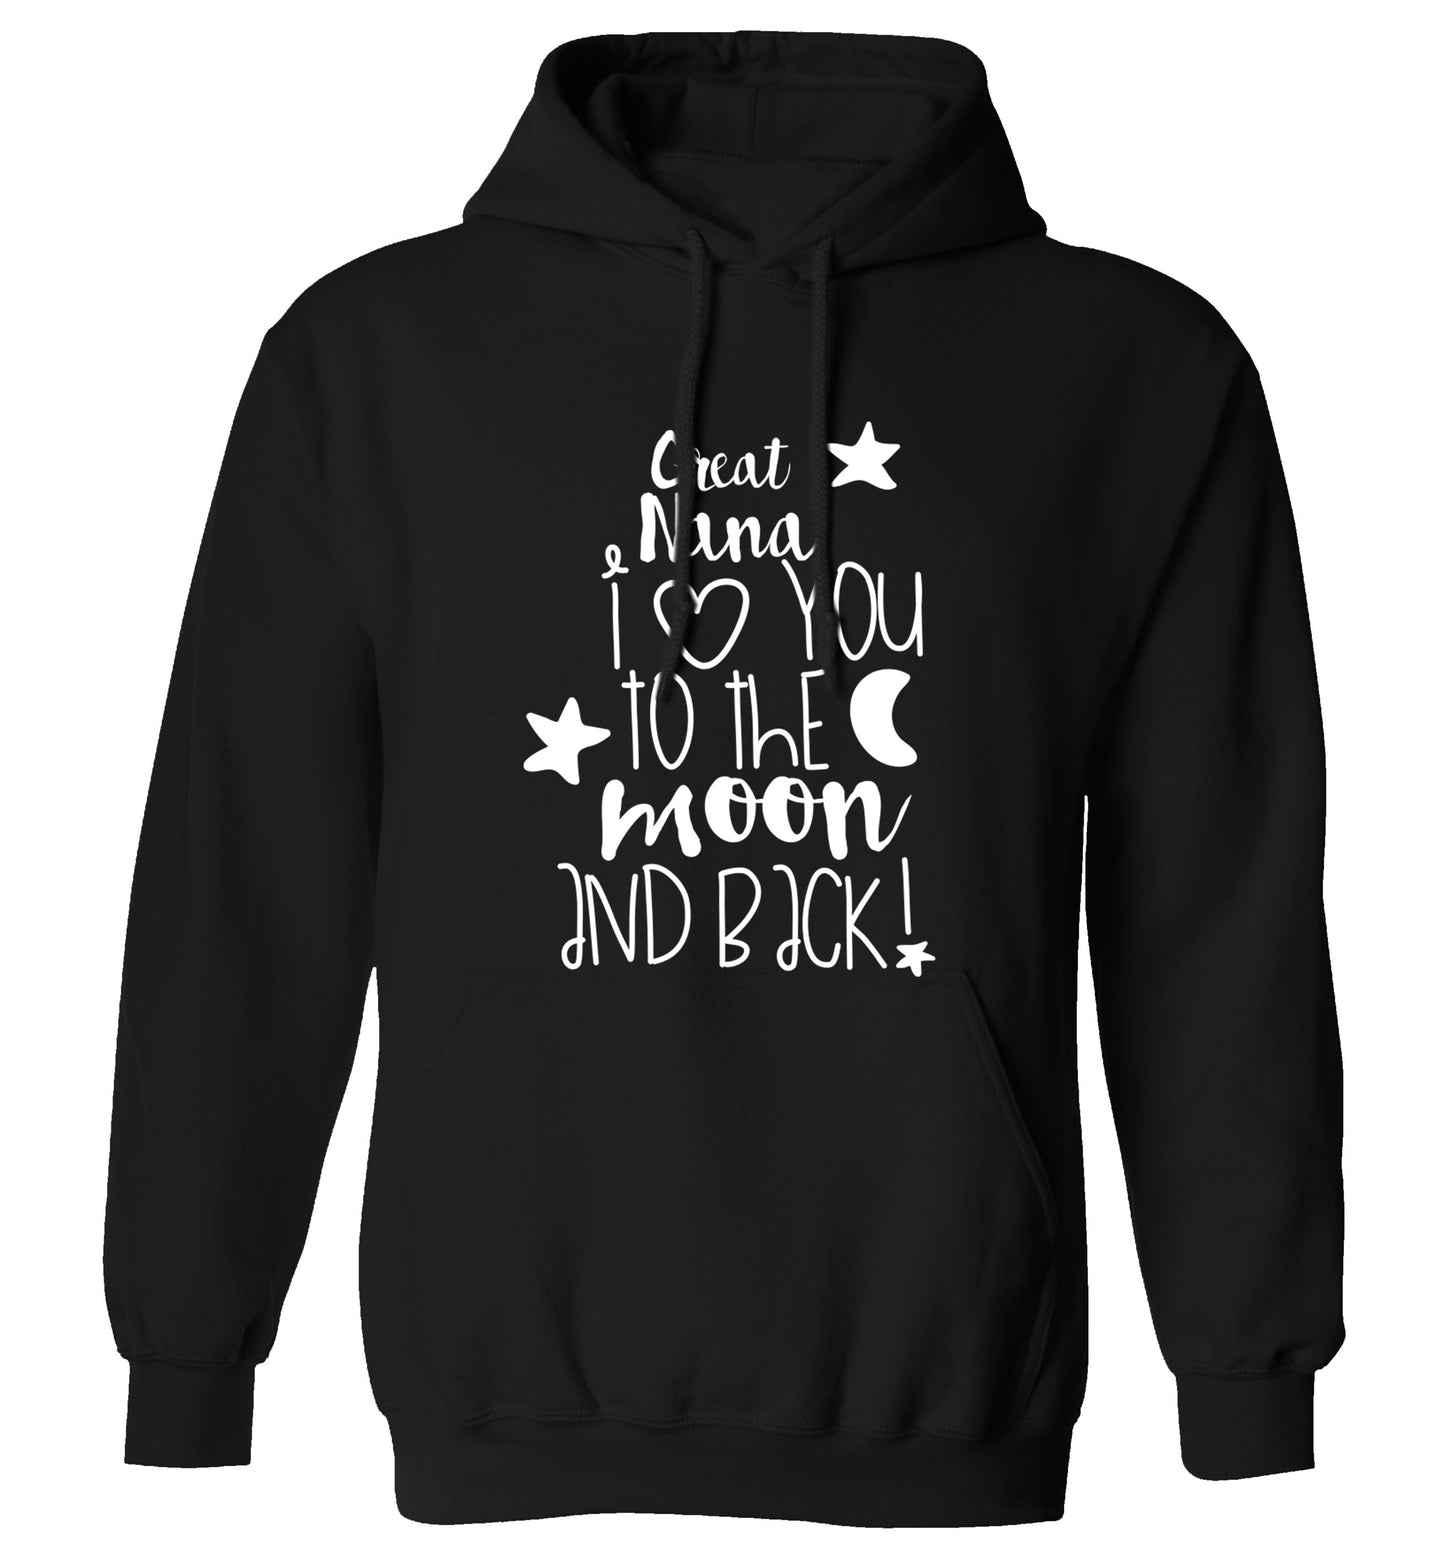 Great Nana I love you to the moon and back adults unisex black hoodie 2XL